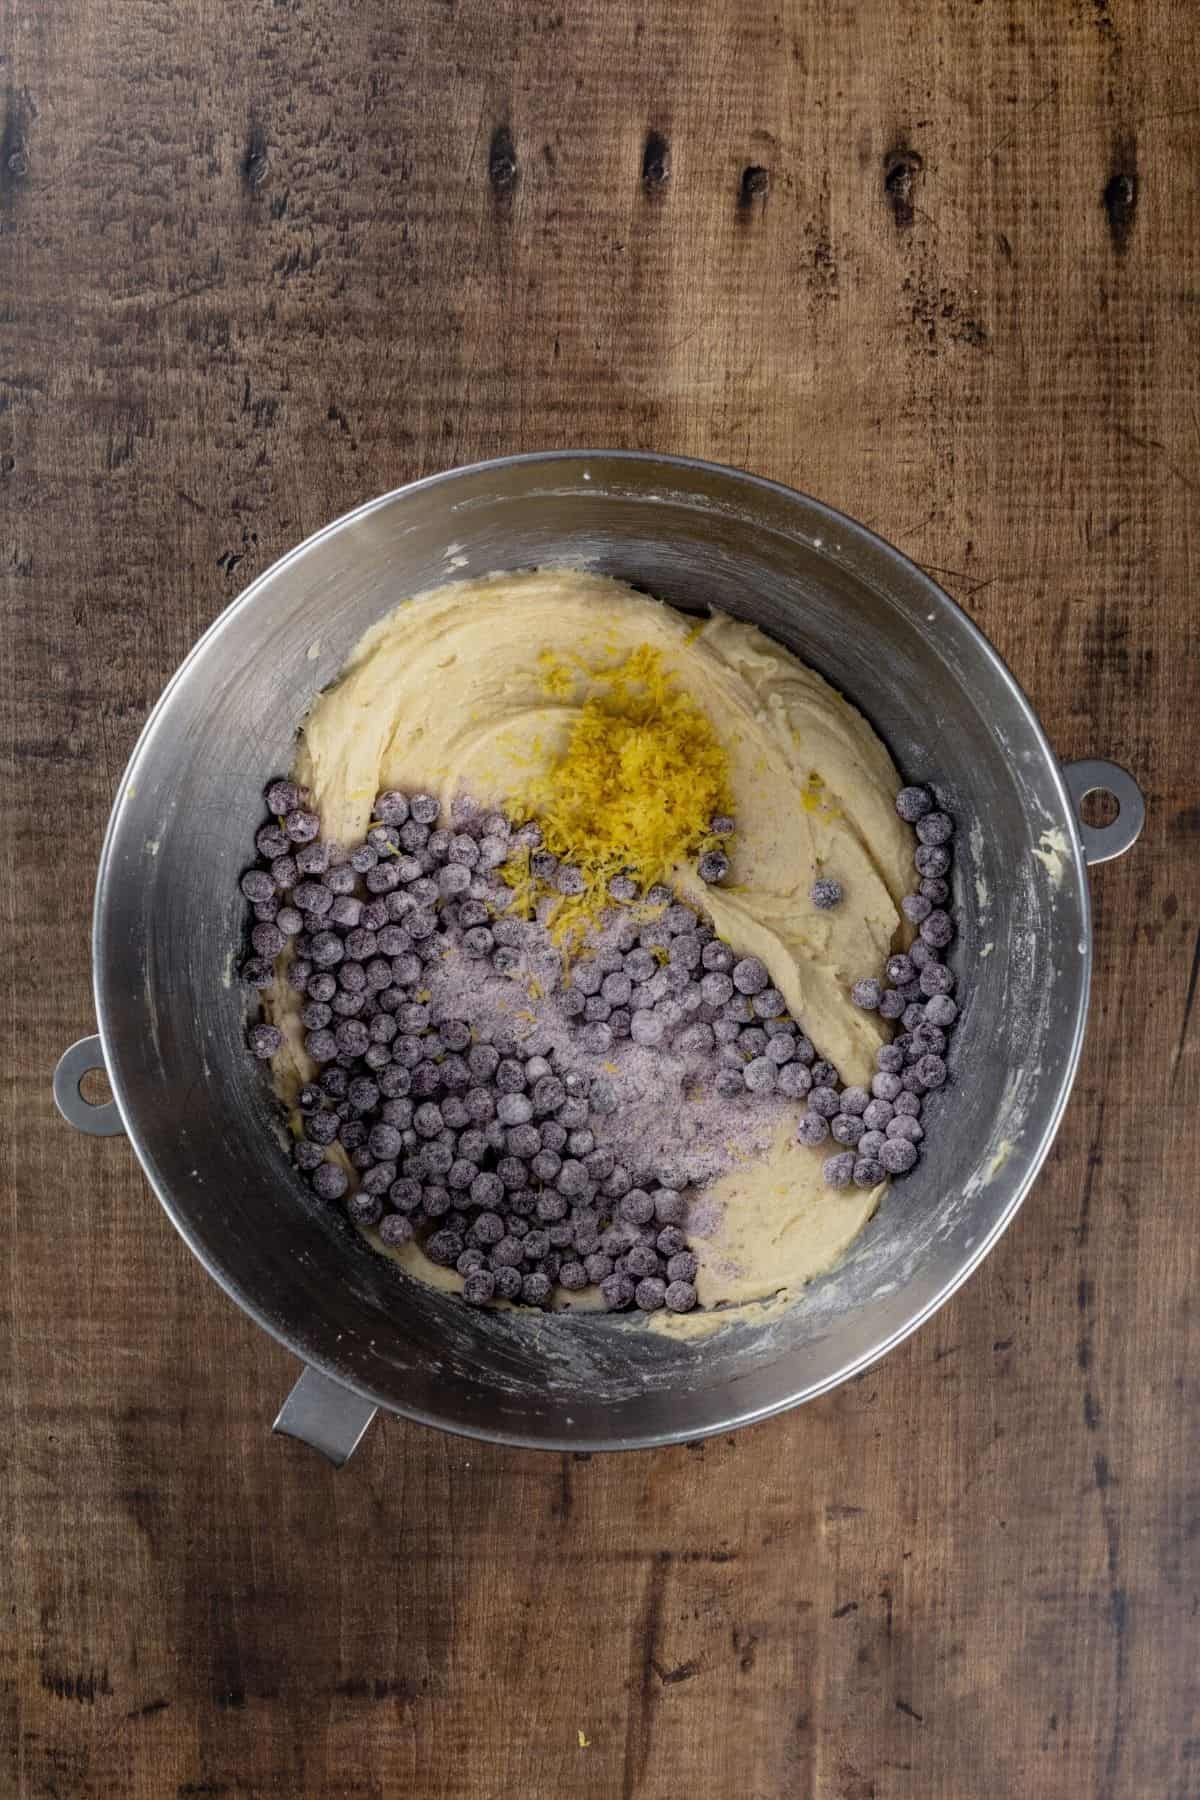 A silver bowl of muffin batter with many blueberries being added.